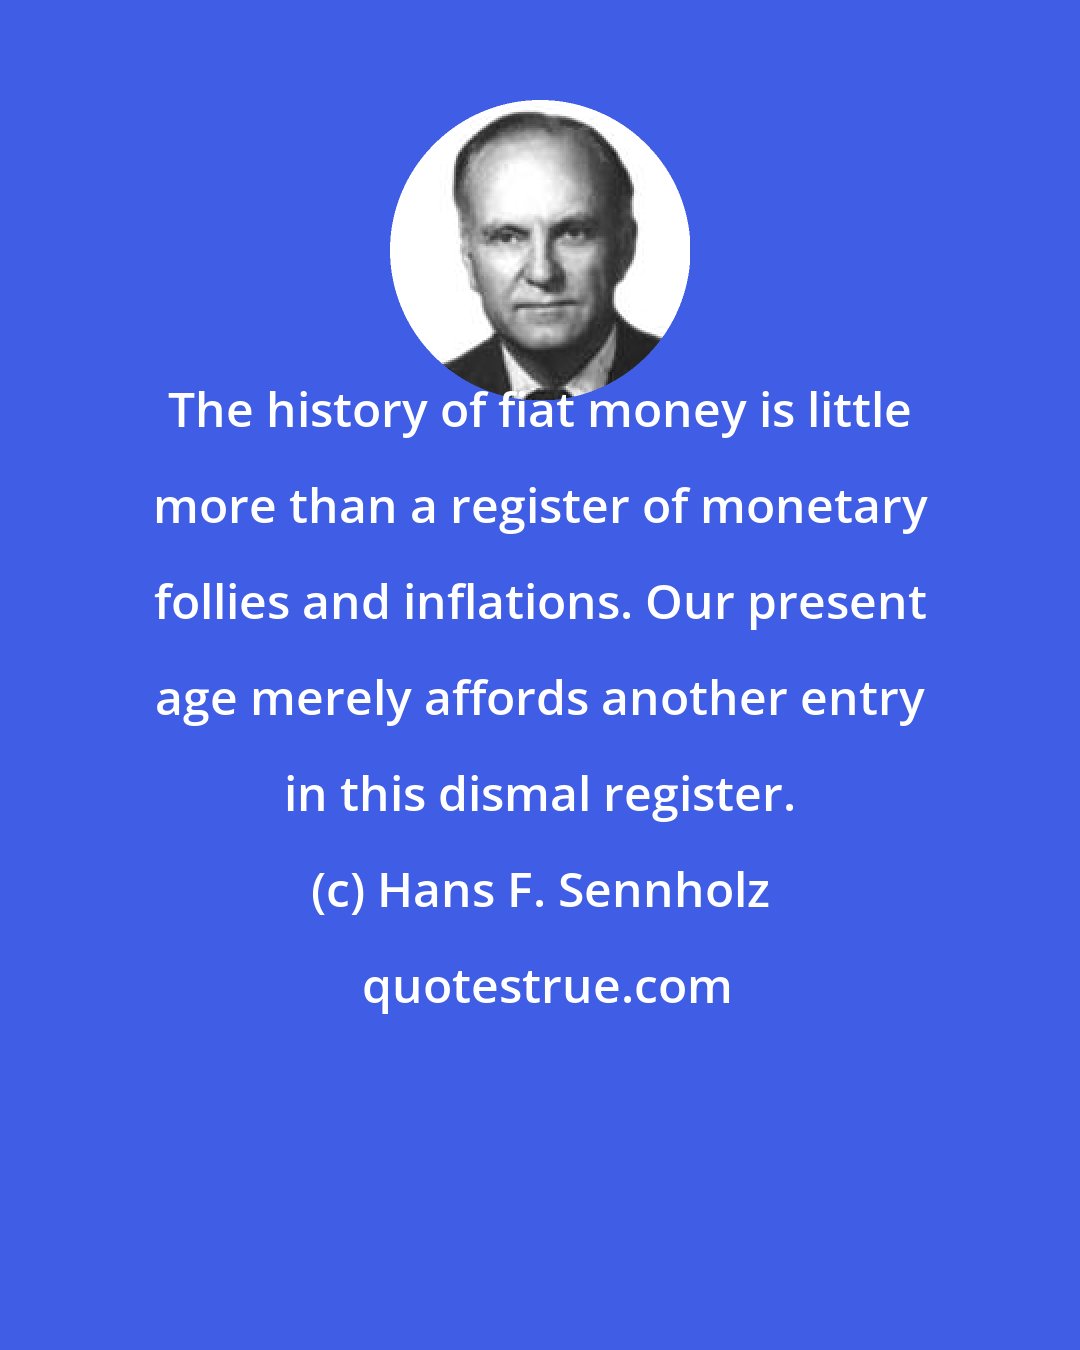 Hans F. Sennholz: The history of fiat money is little more than a register of monetary follies and inflations. Our present age merely affords another entry in this dismal register.